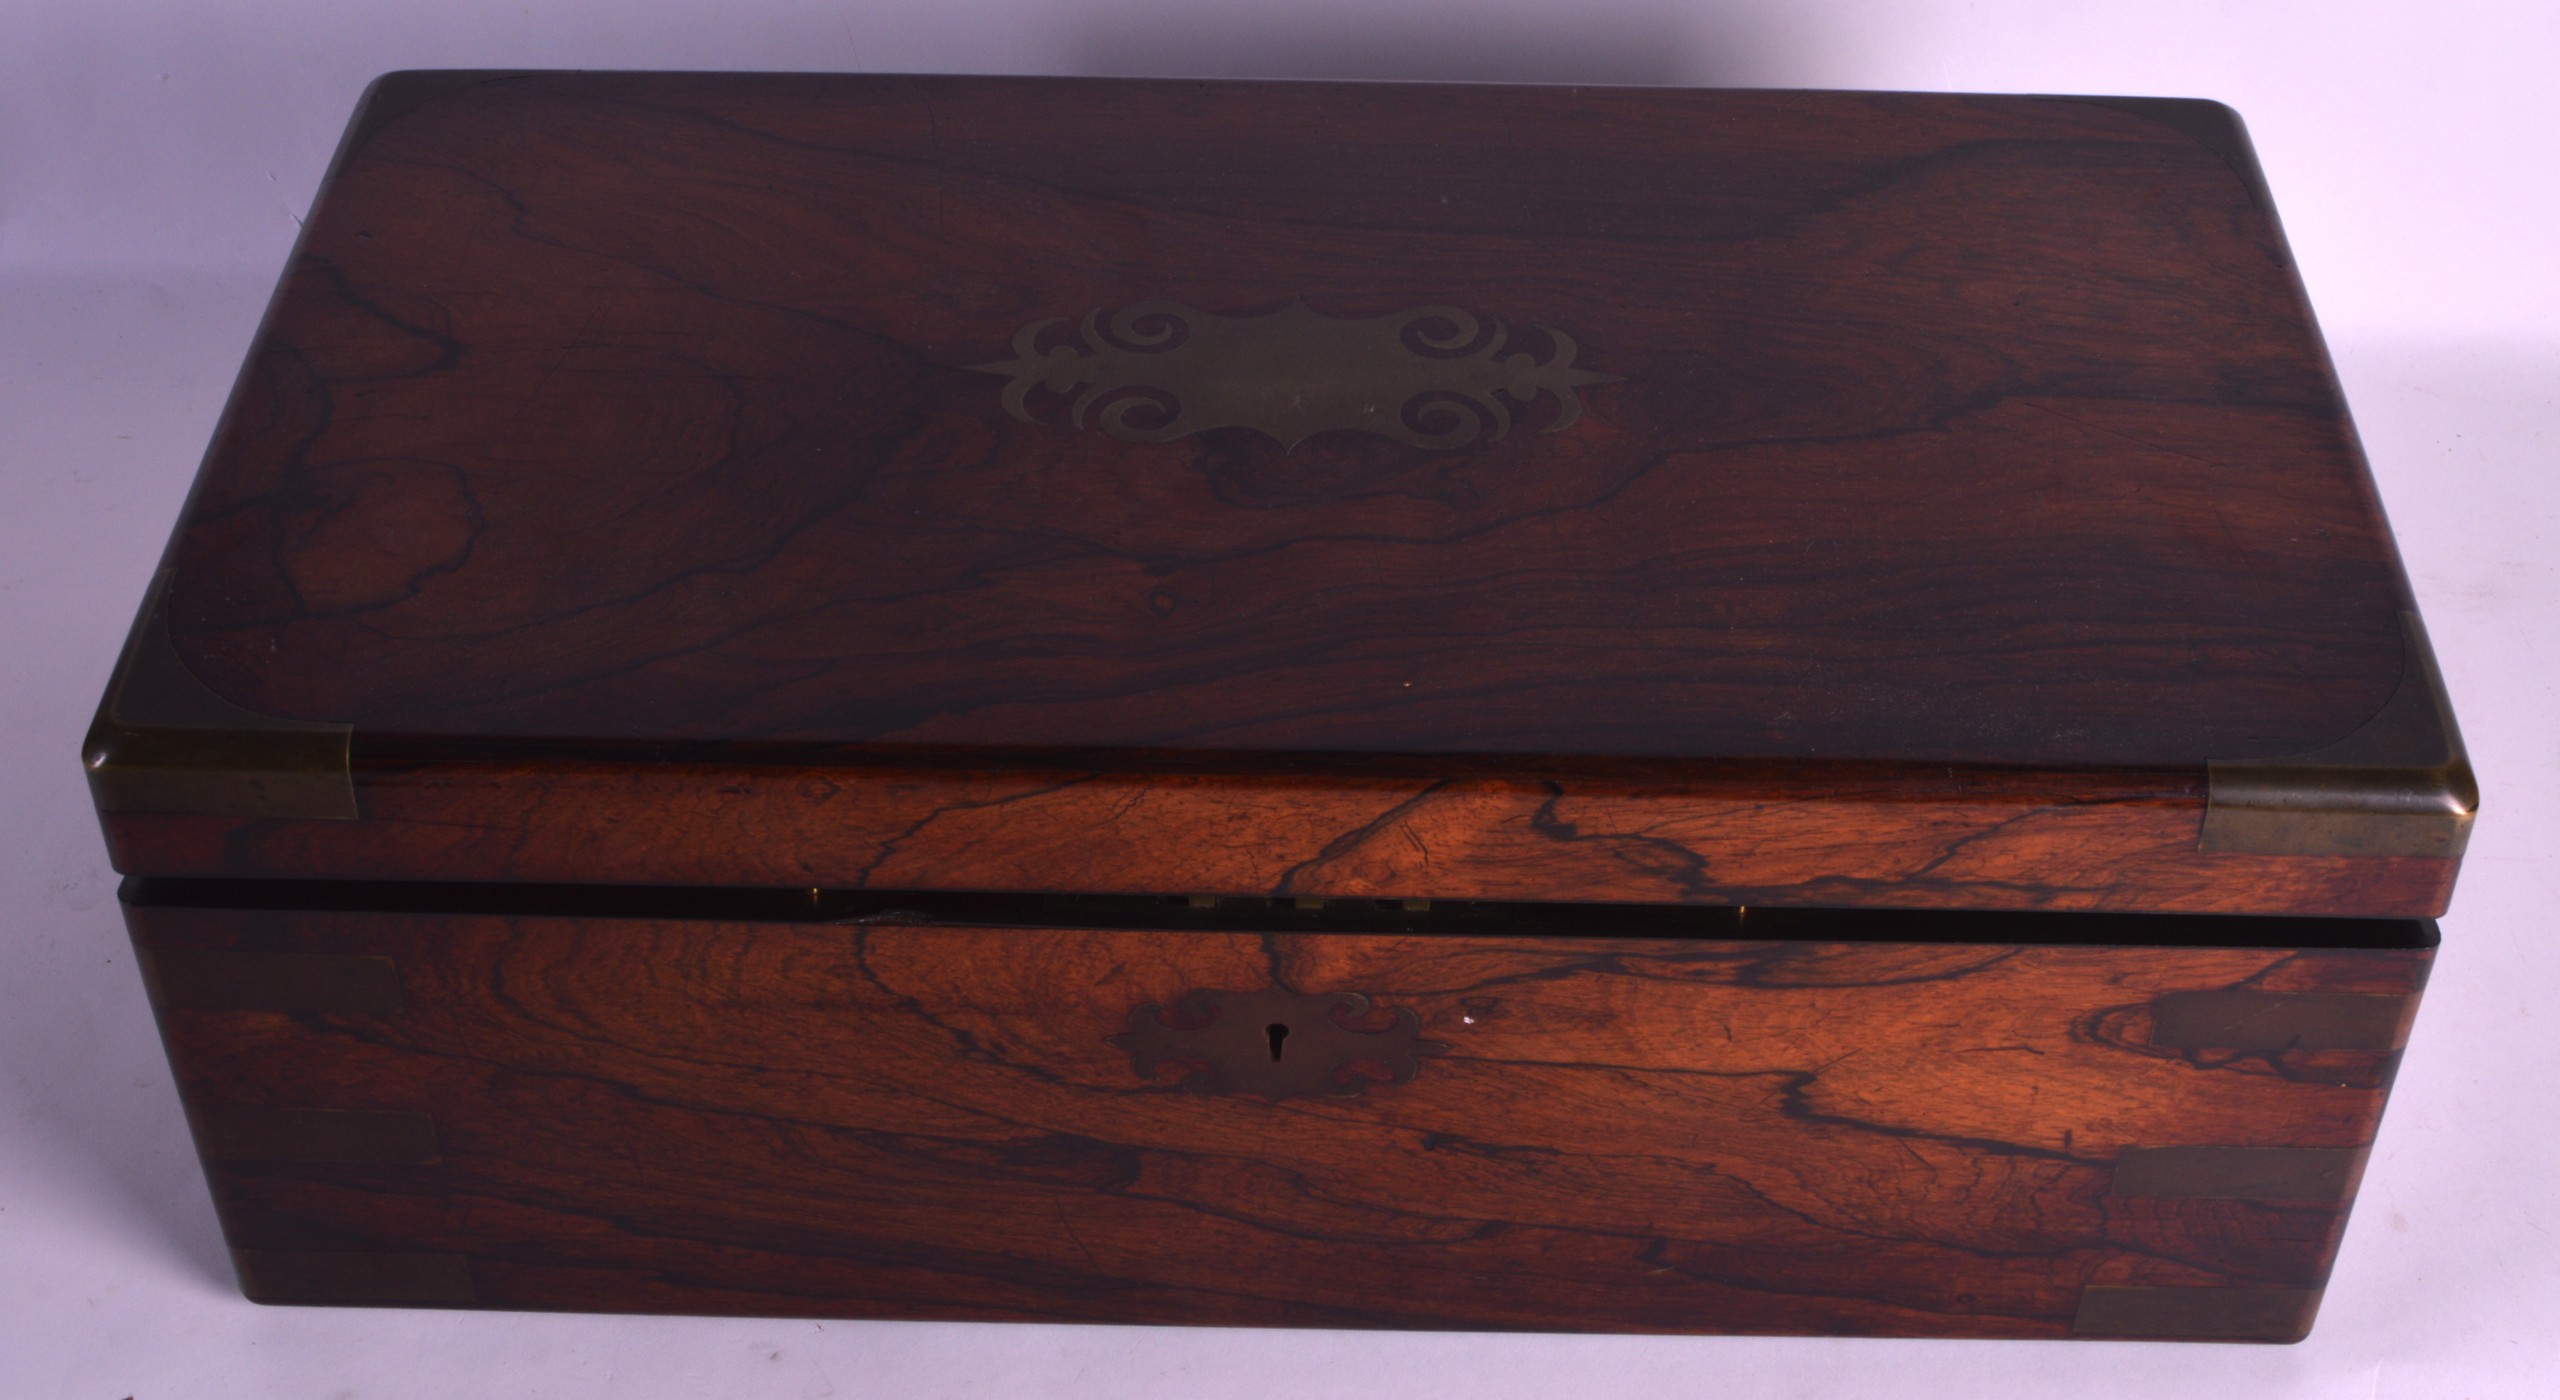 A FINE VICTORIAN SCOTTISH CARVED ROSEWOOD WRITING BOX with brass inlay, the top rising to reveal a